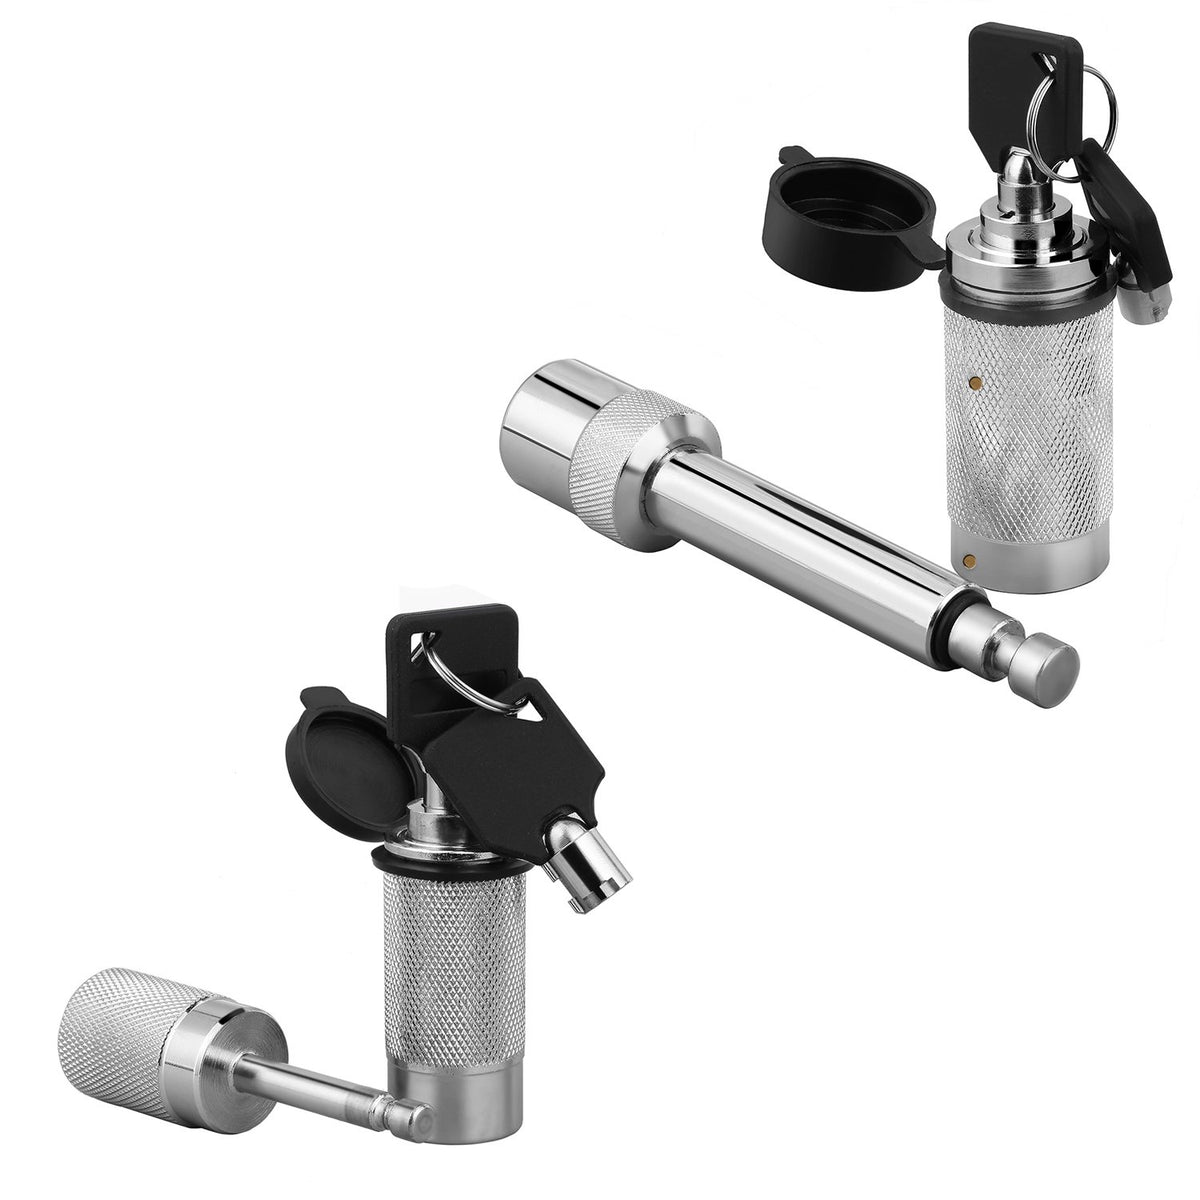 5/8'' Hitch Pin and 1/4'' Trailer Coupler Chrome-plated Hardened Steel Lock Set, Plum Blossom Lock Core and Rubber Caps for Weather Guard Protection